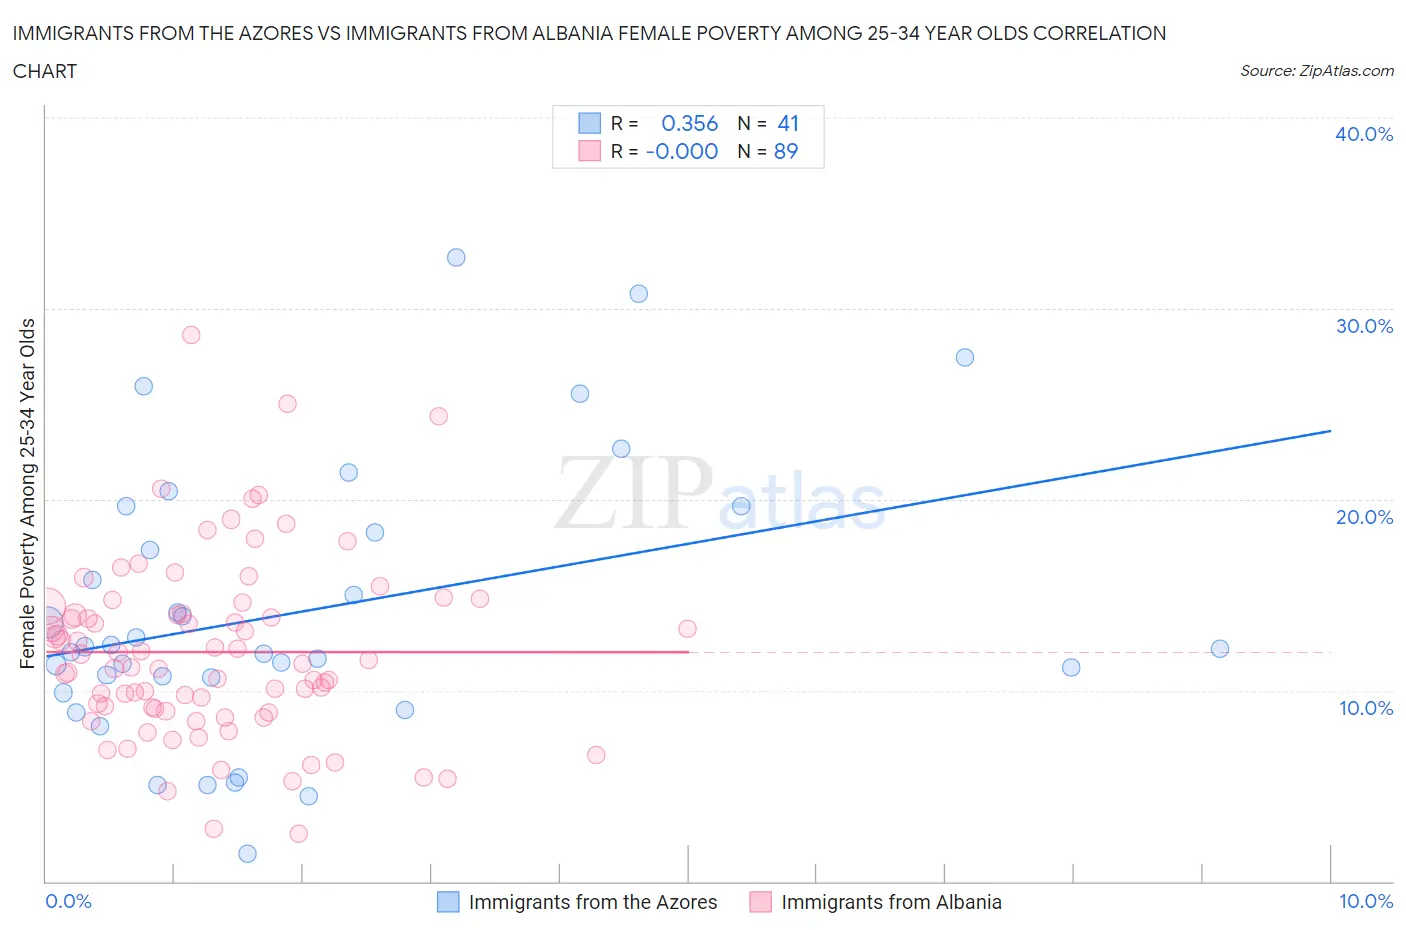 Immigrants from the Azores vs Immigrants from Albania Female Poverty Among 25-34 Year Olds